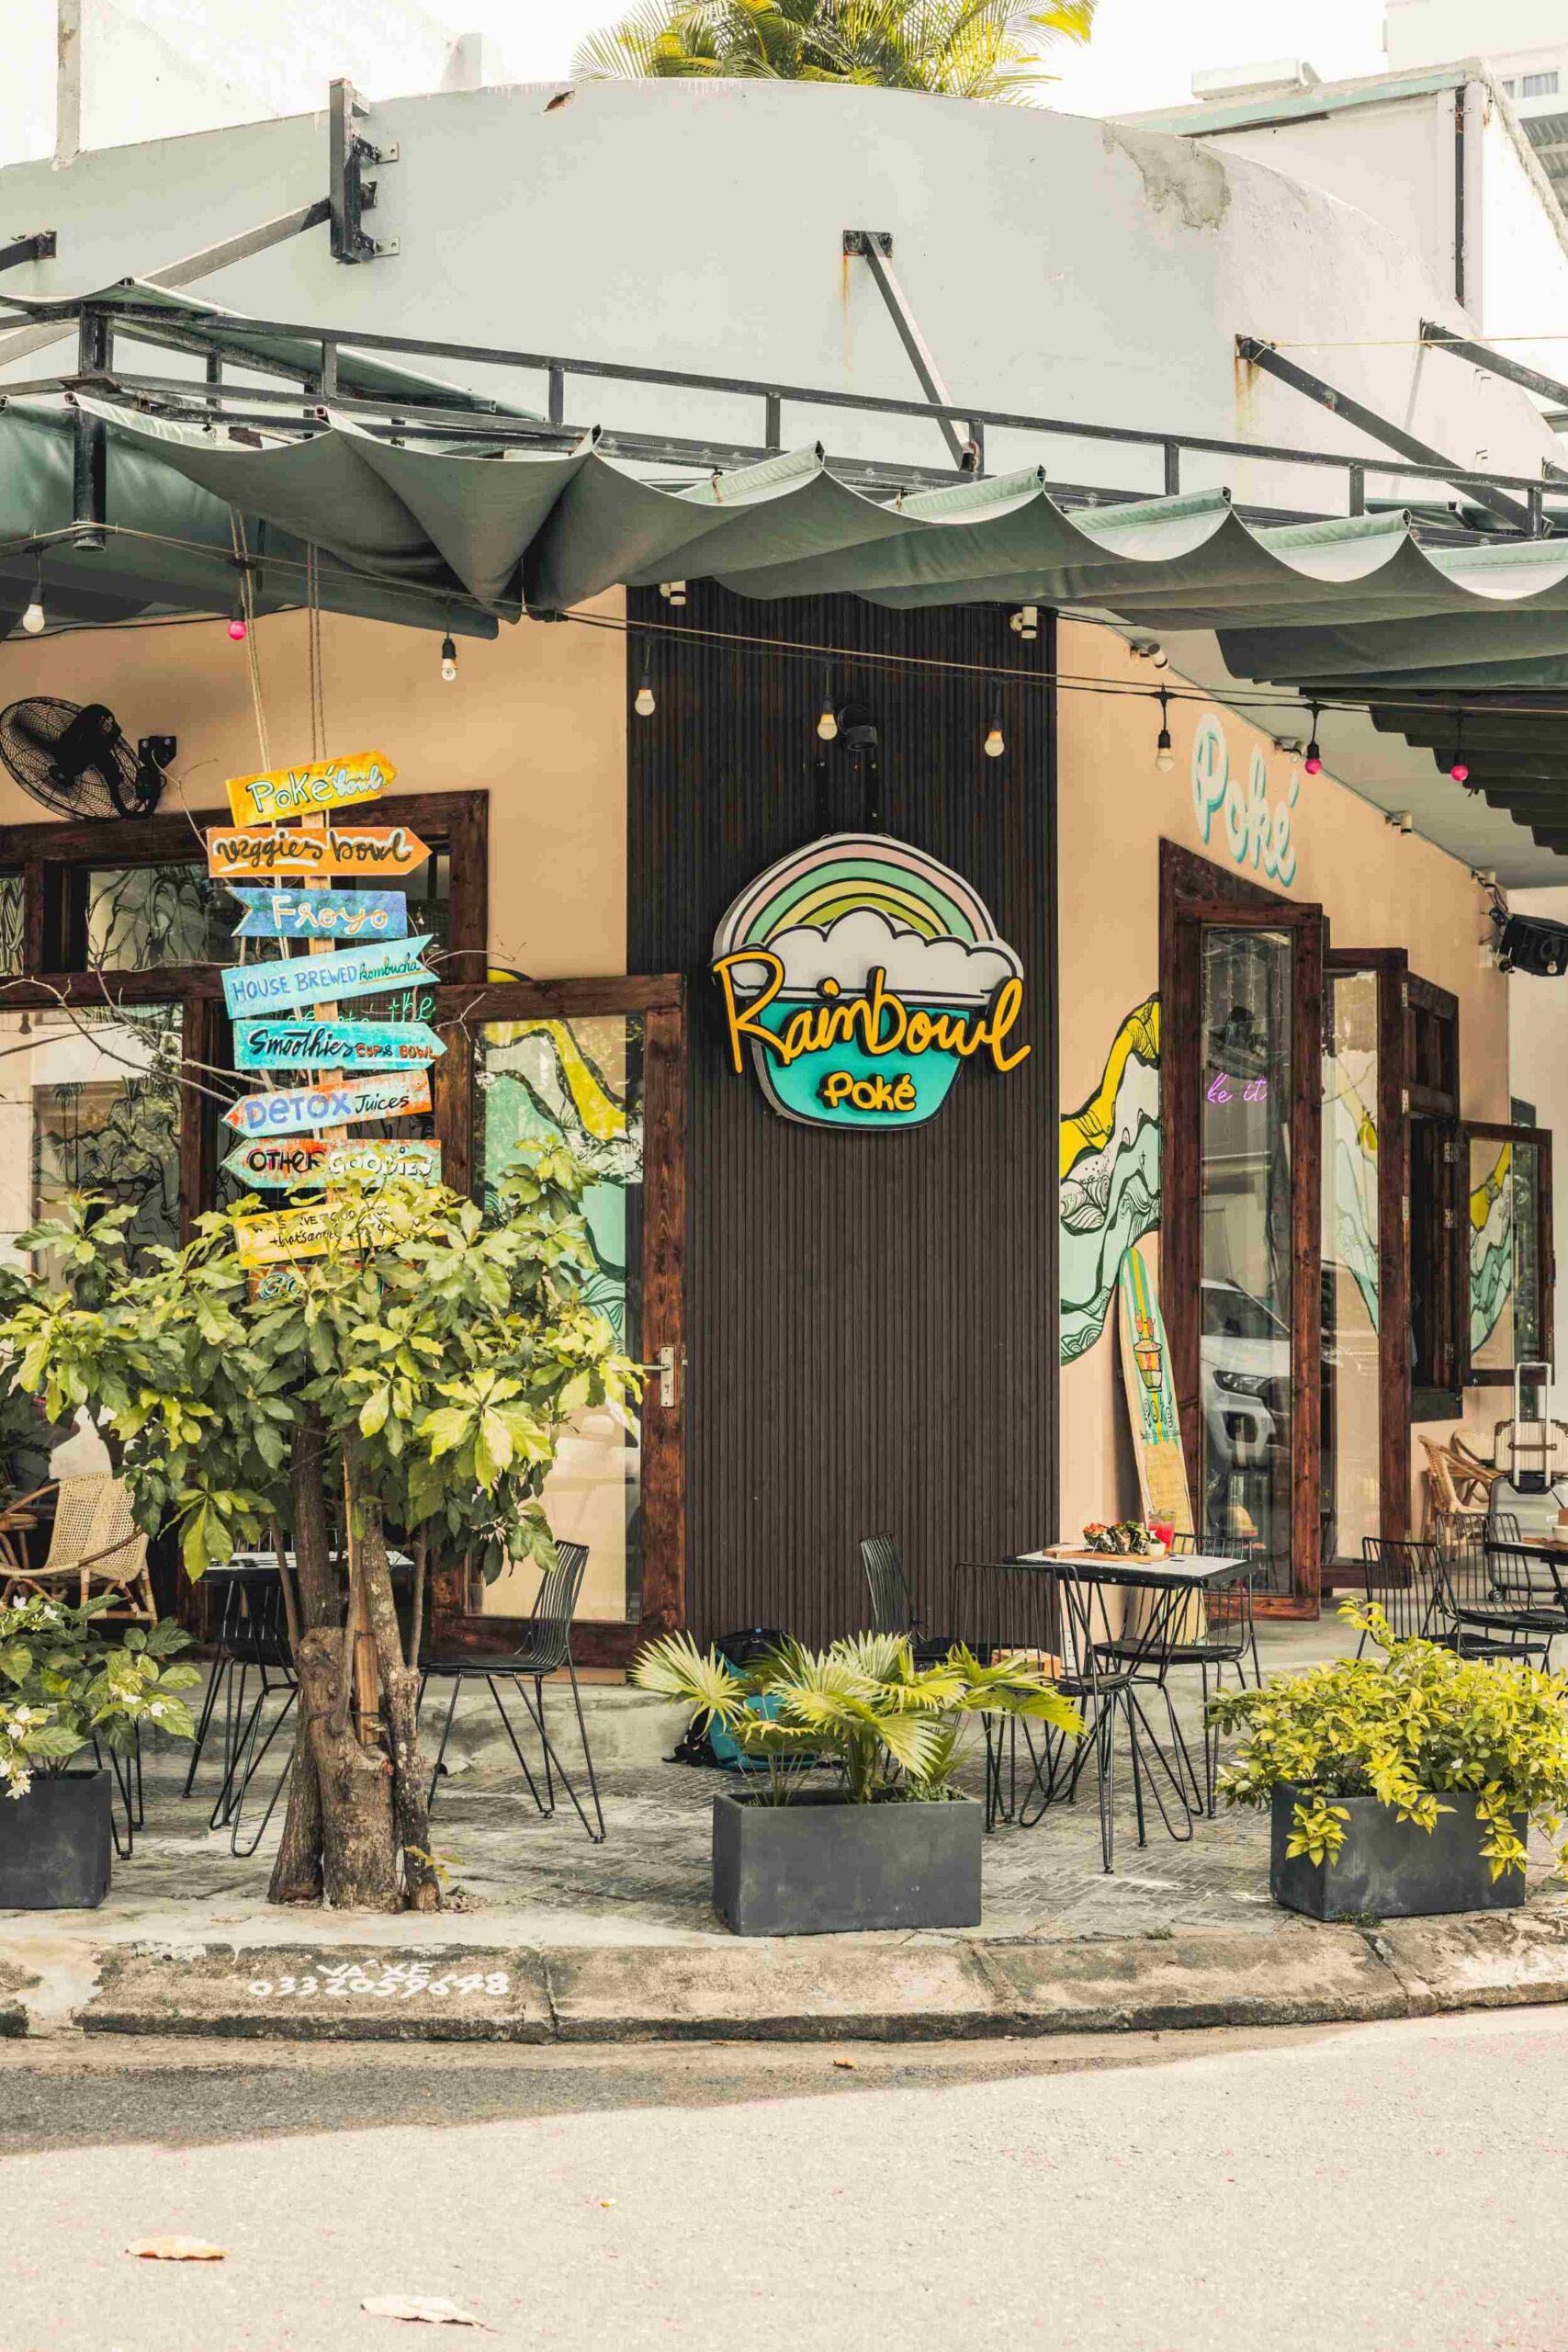 The outside view of Rainbowl Poke restaurant in Da Nang showing outdoor seating and signage